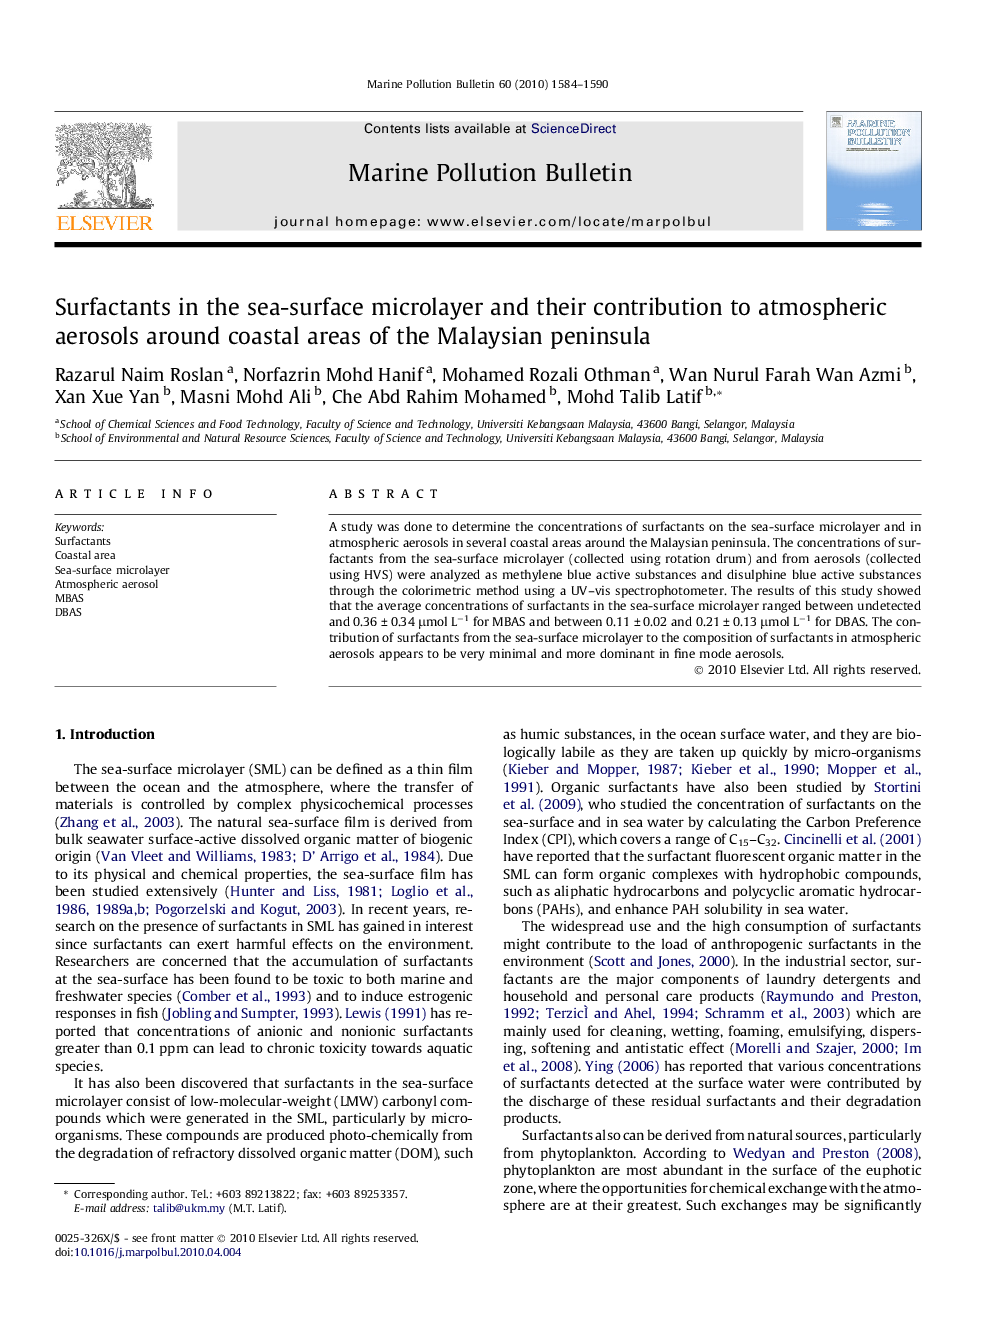 Surfactants in the sea-surface microlayer and their contribution to atmospheric aerosols around coastal areas of the Malaysian peninsula